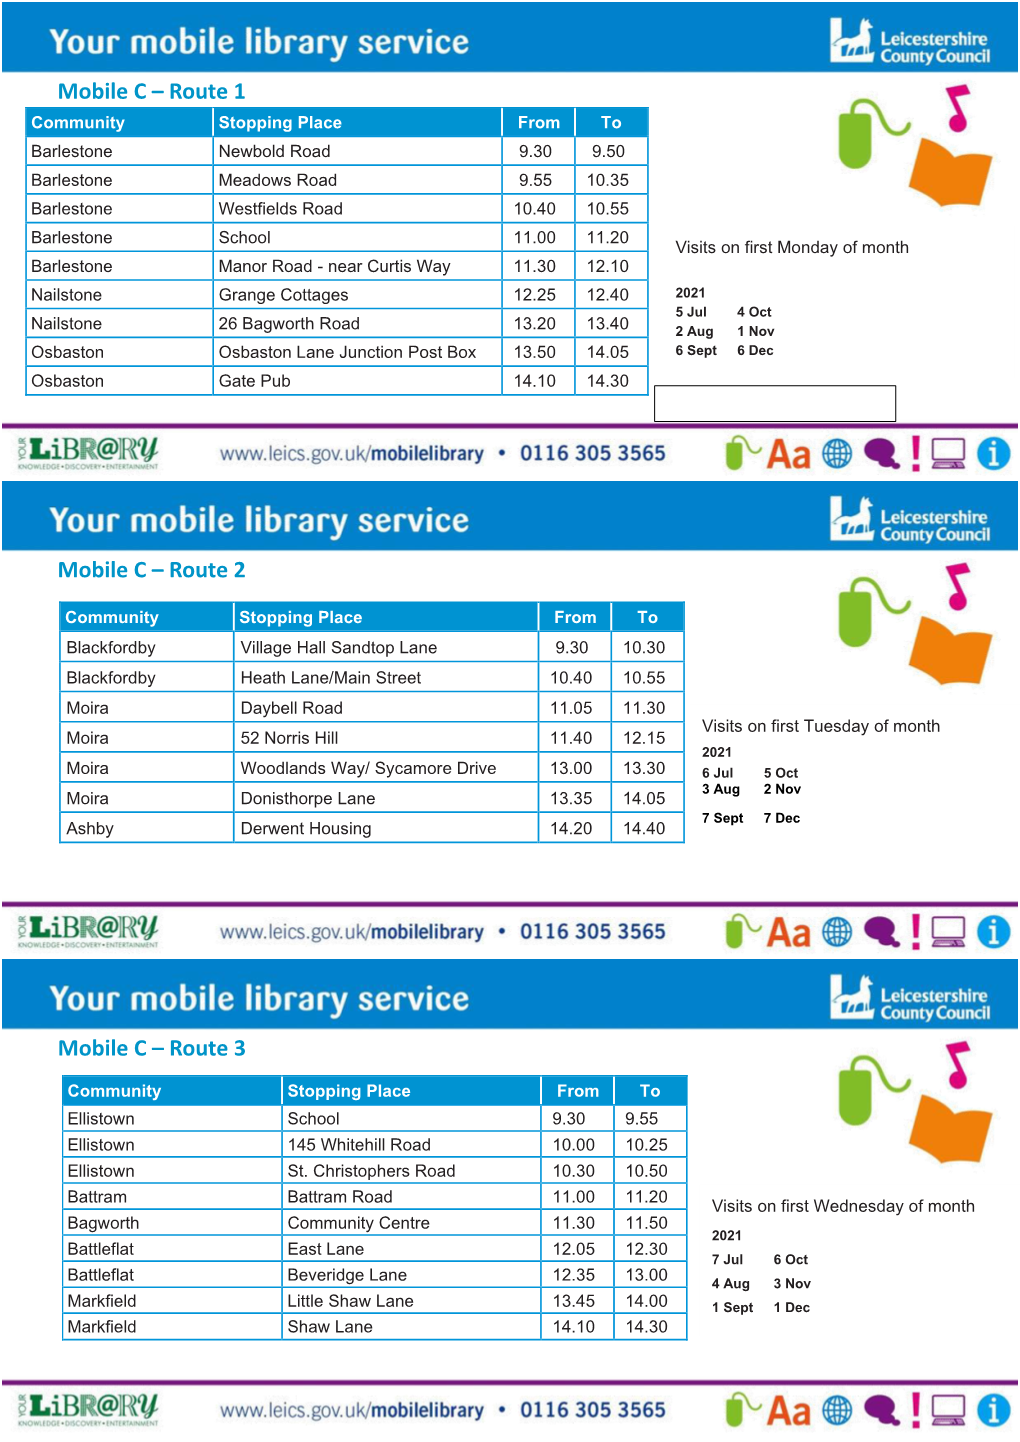 Mobile Library C